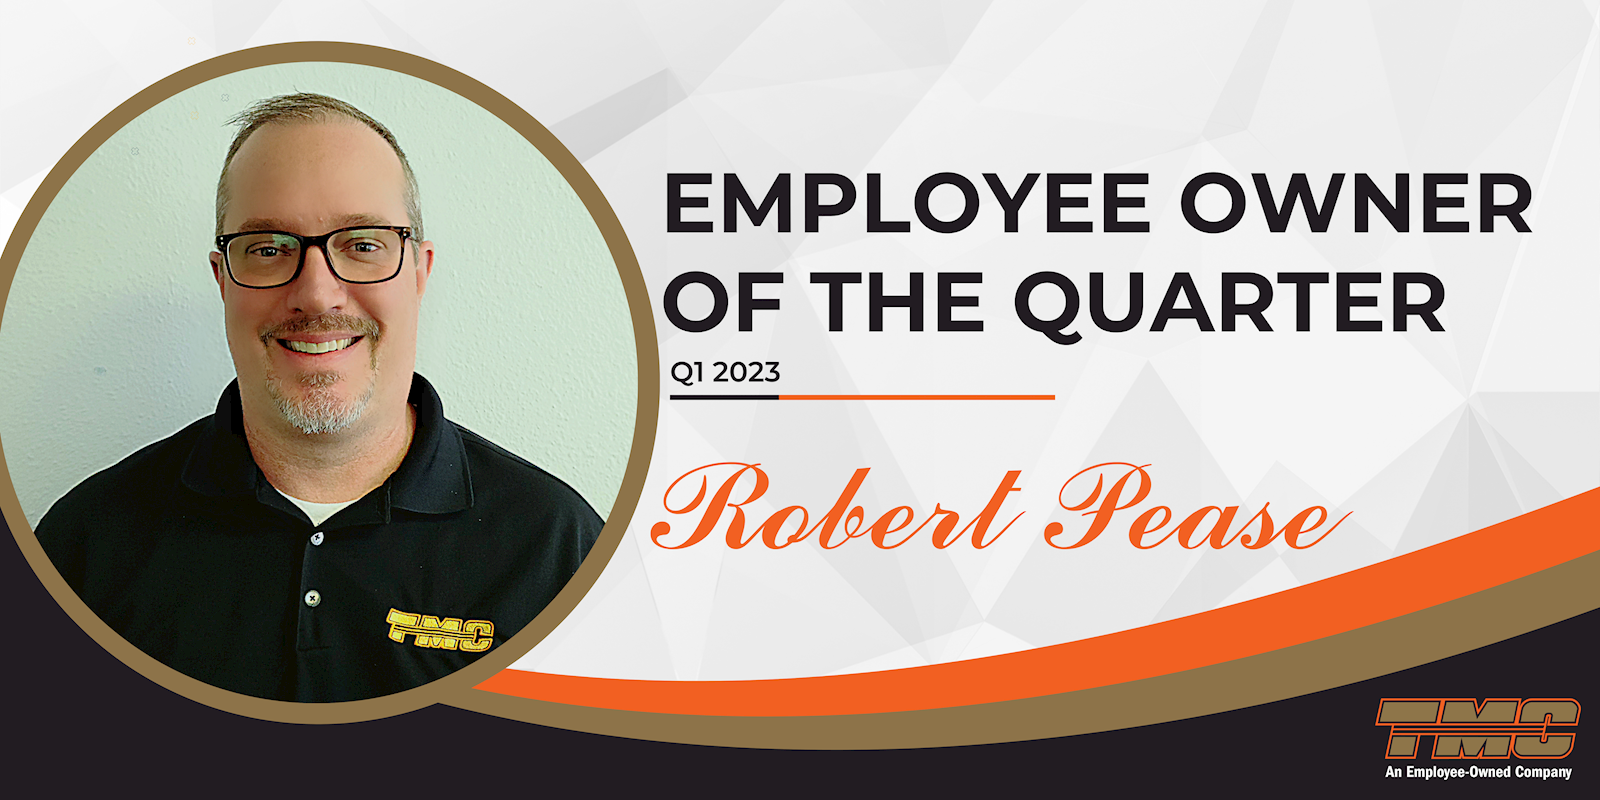 Employee Owner of the First Quarter: Robert Pease